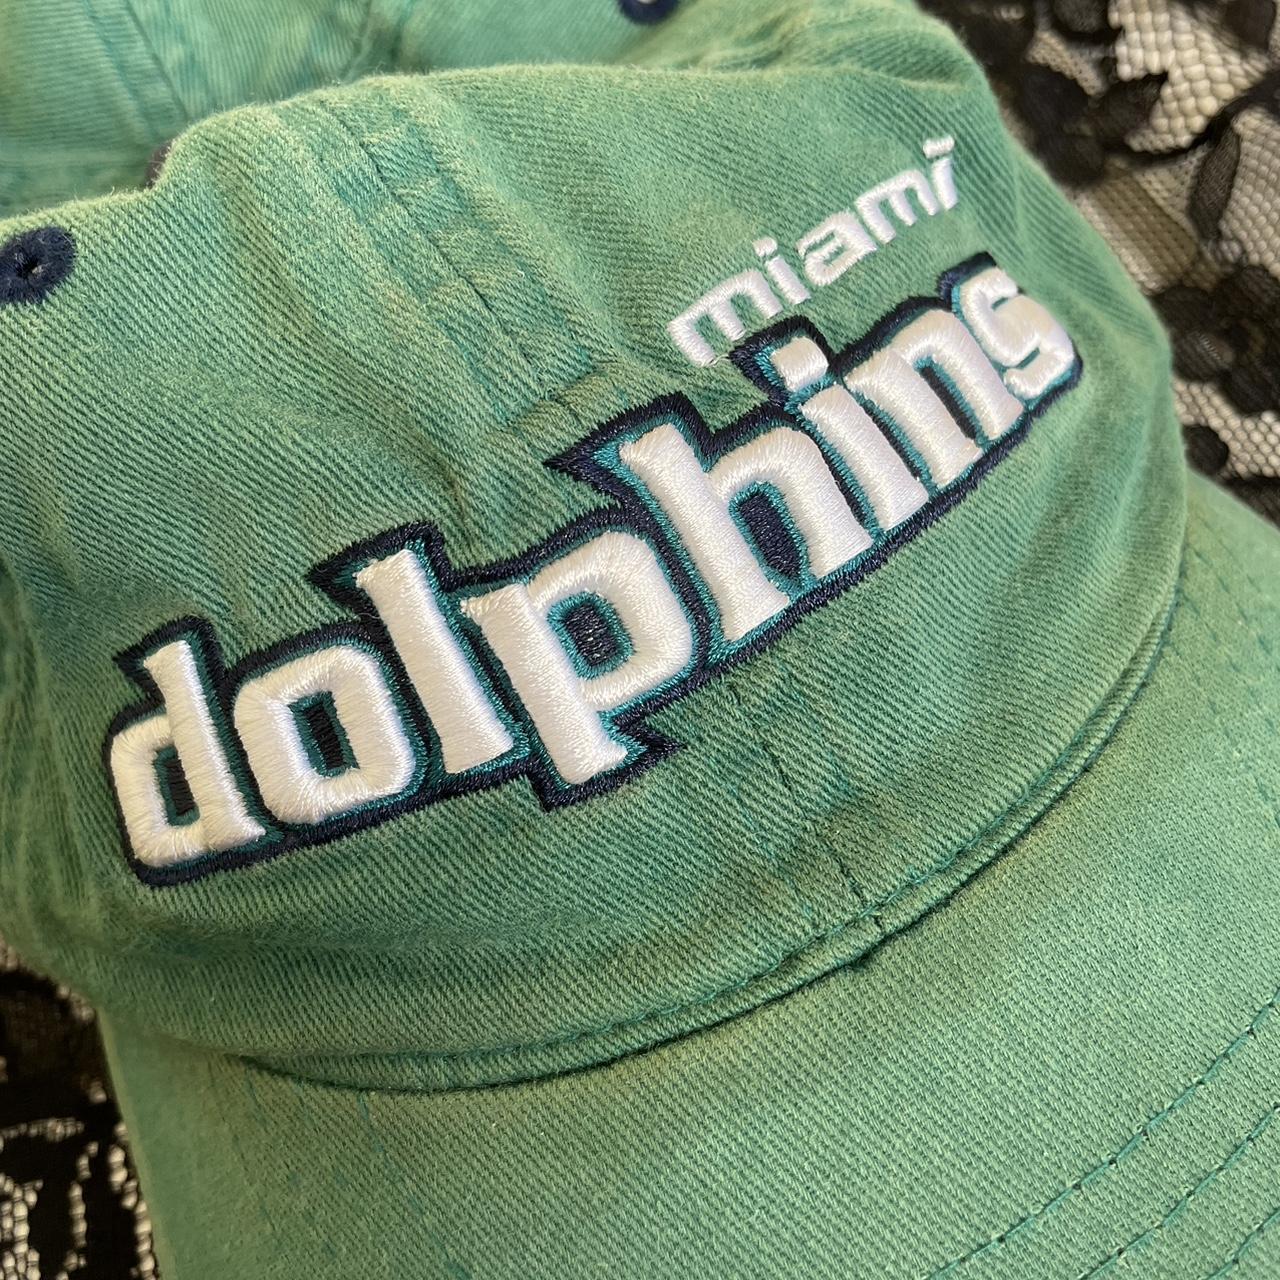 Vintage Miami Dolphins Hat Old Logo The Eastport By - Depop